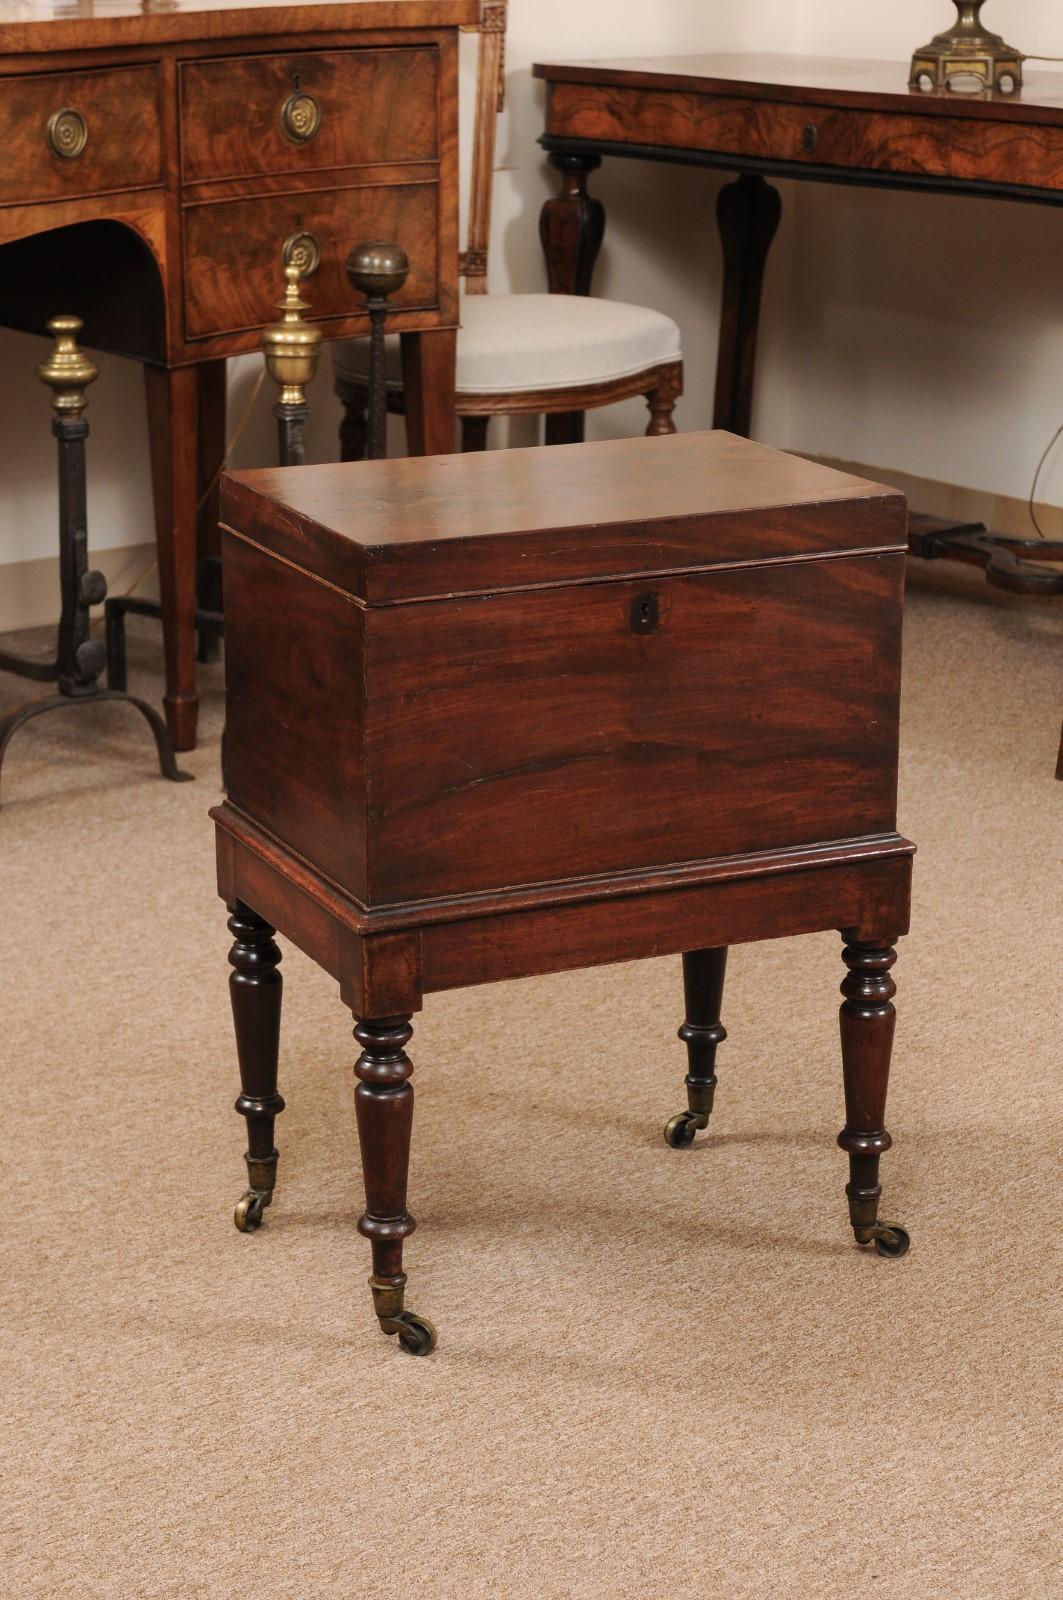 George III Mahogany Cellarette on stand, England early 19th century.